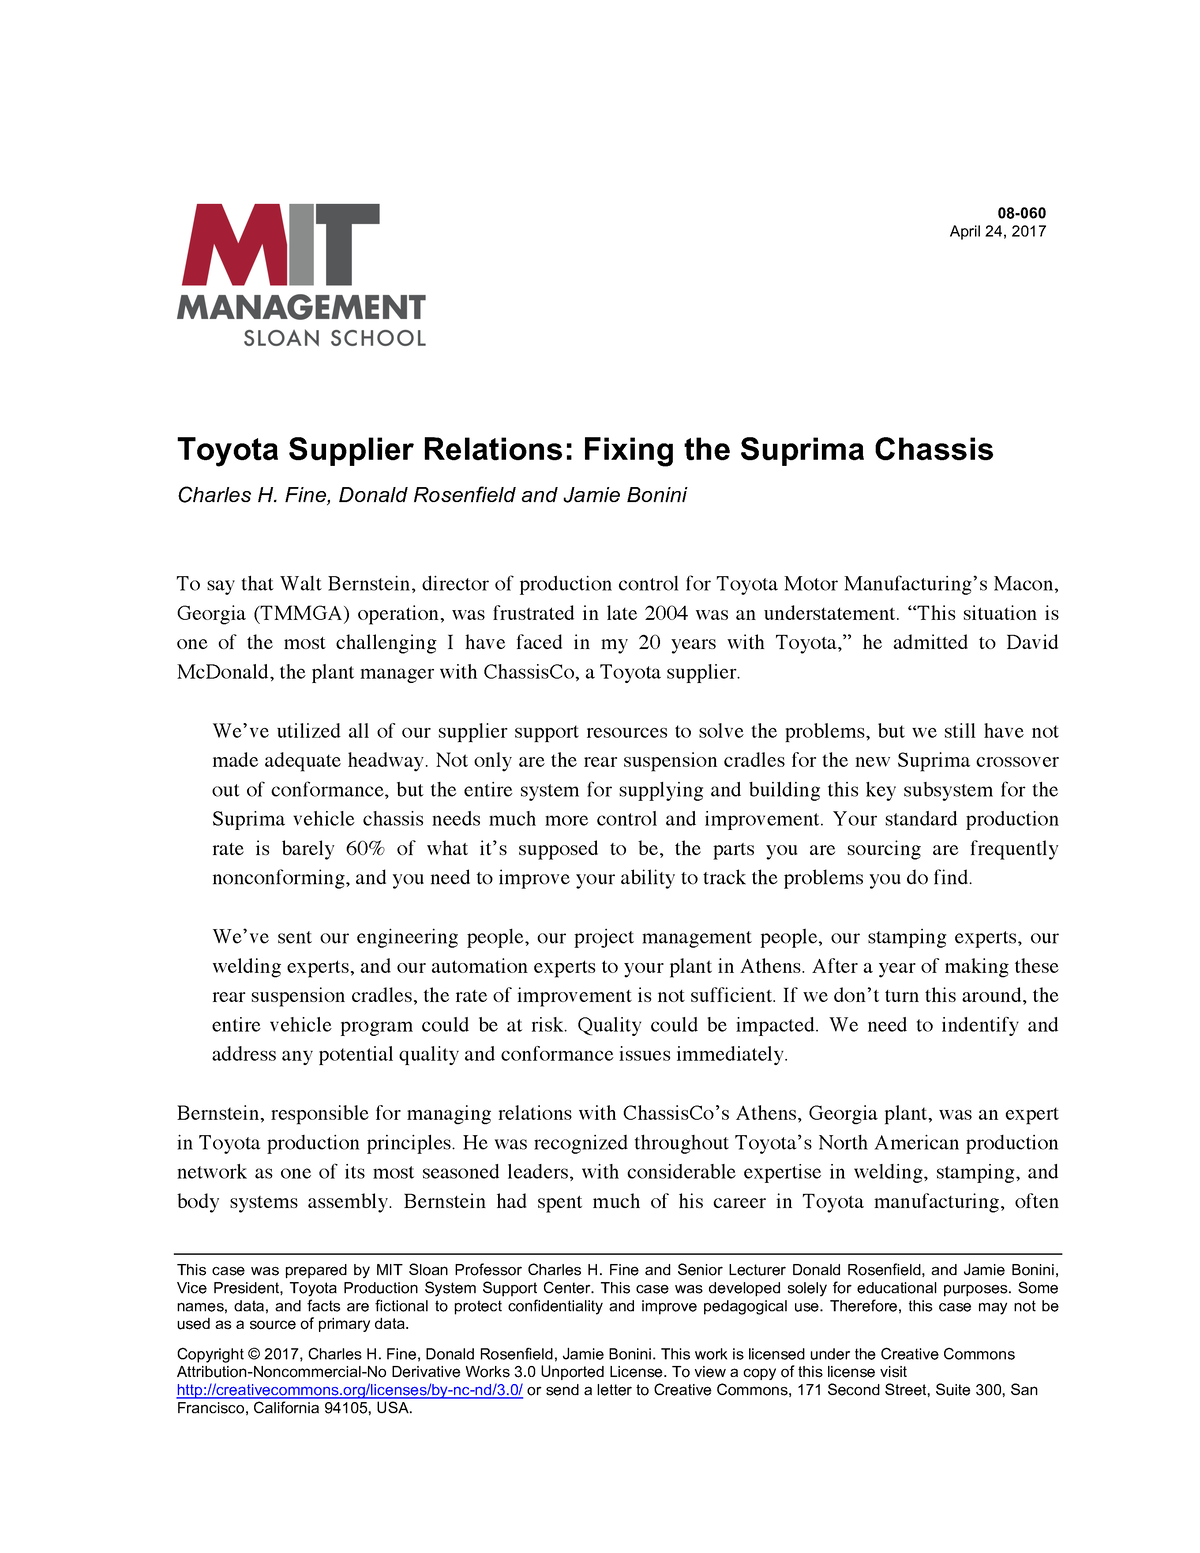 toyota supplier relations fixing the suprima chassis case study solution